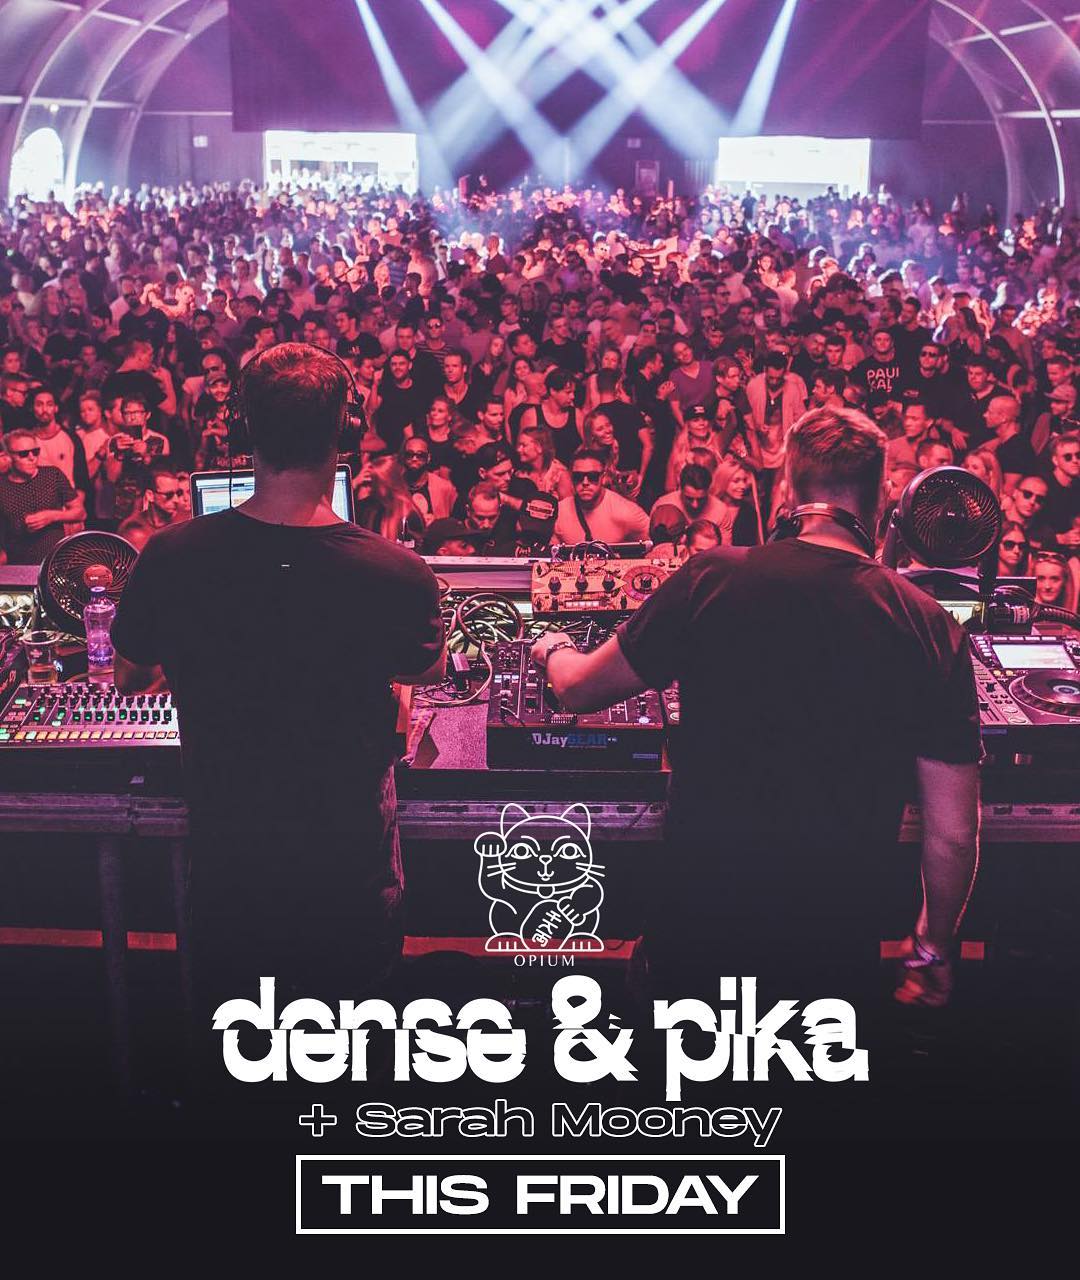 Drumcode regulars @dense_and_pika are joined by homegrown...